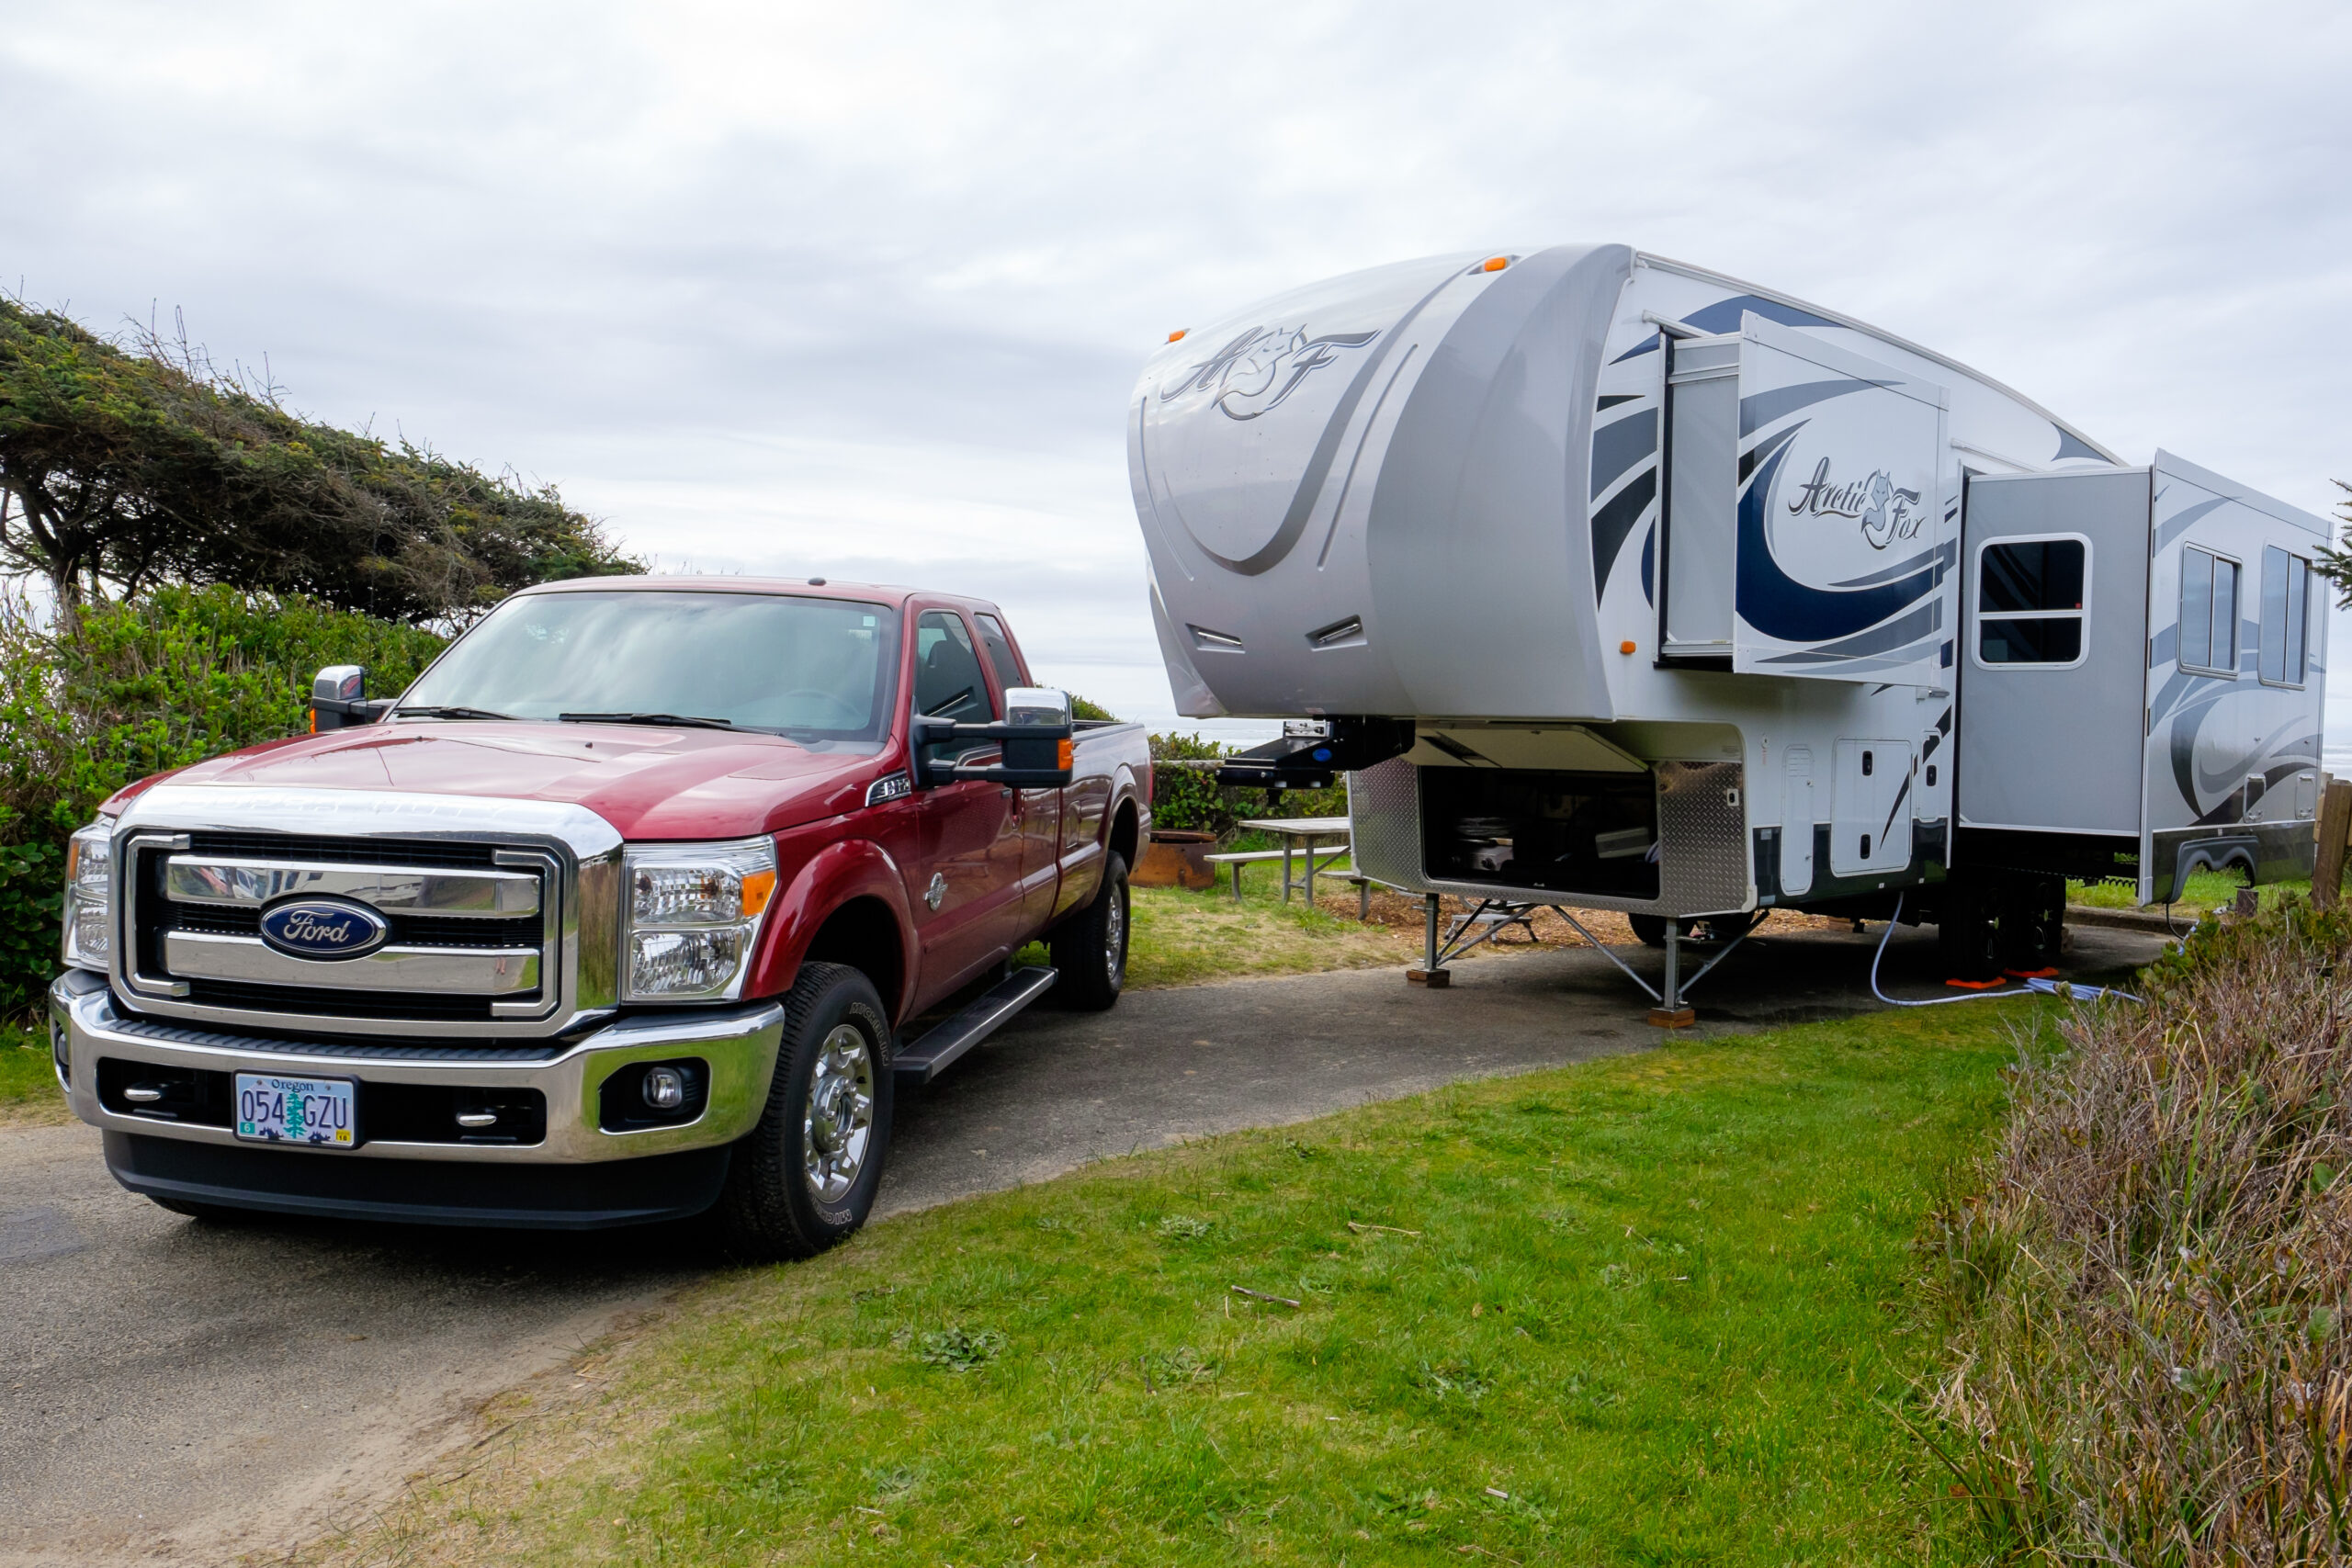 5th wheel towing guide - camper set up at campsite with a truck